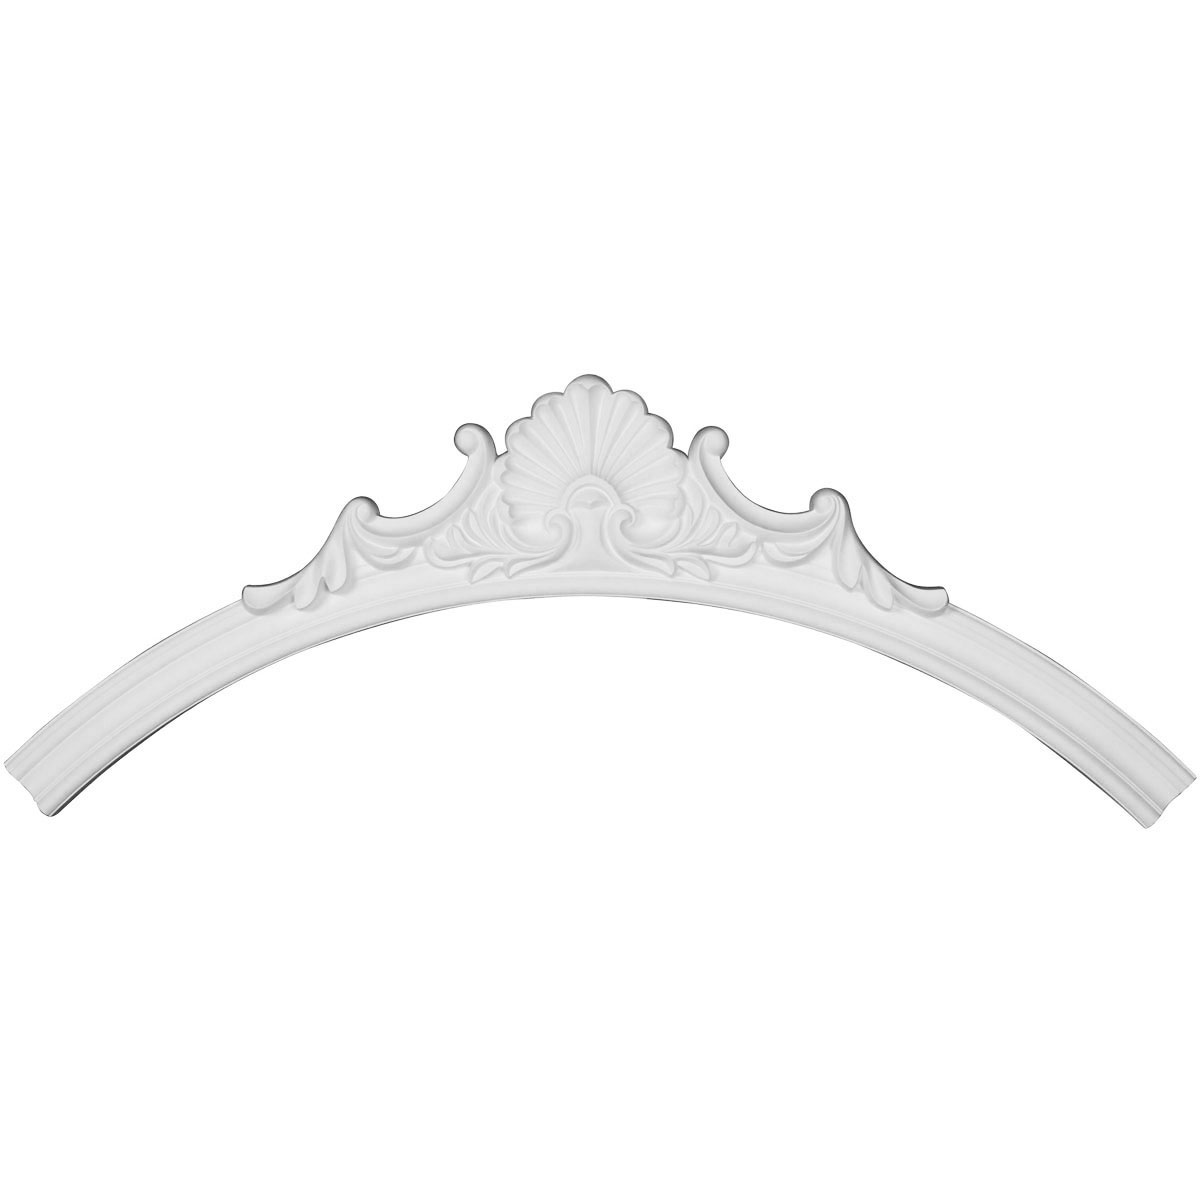 77.63 X 70.87 X 3.38 X 1 In. Shell Ceiling Ring - 0.25 Of Complete Circle